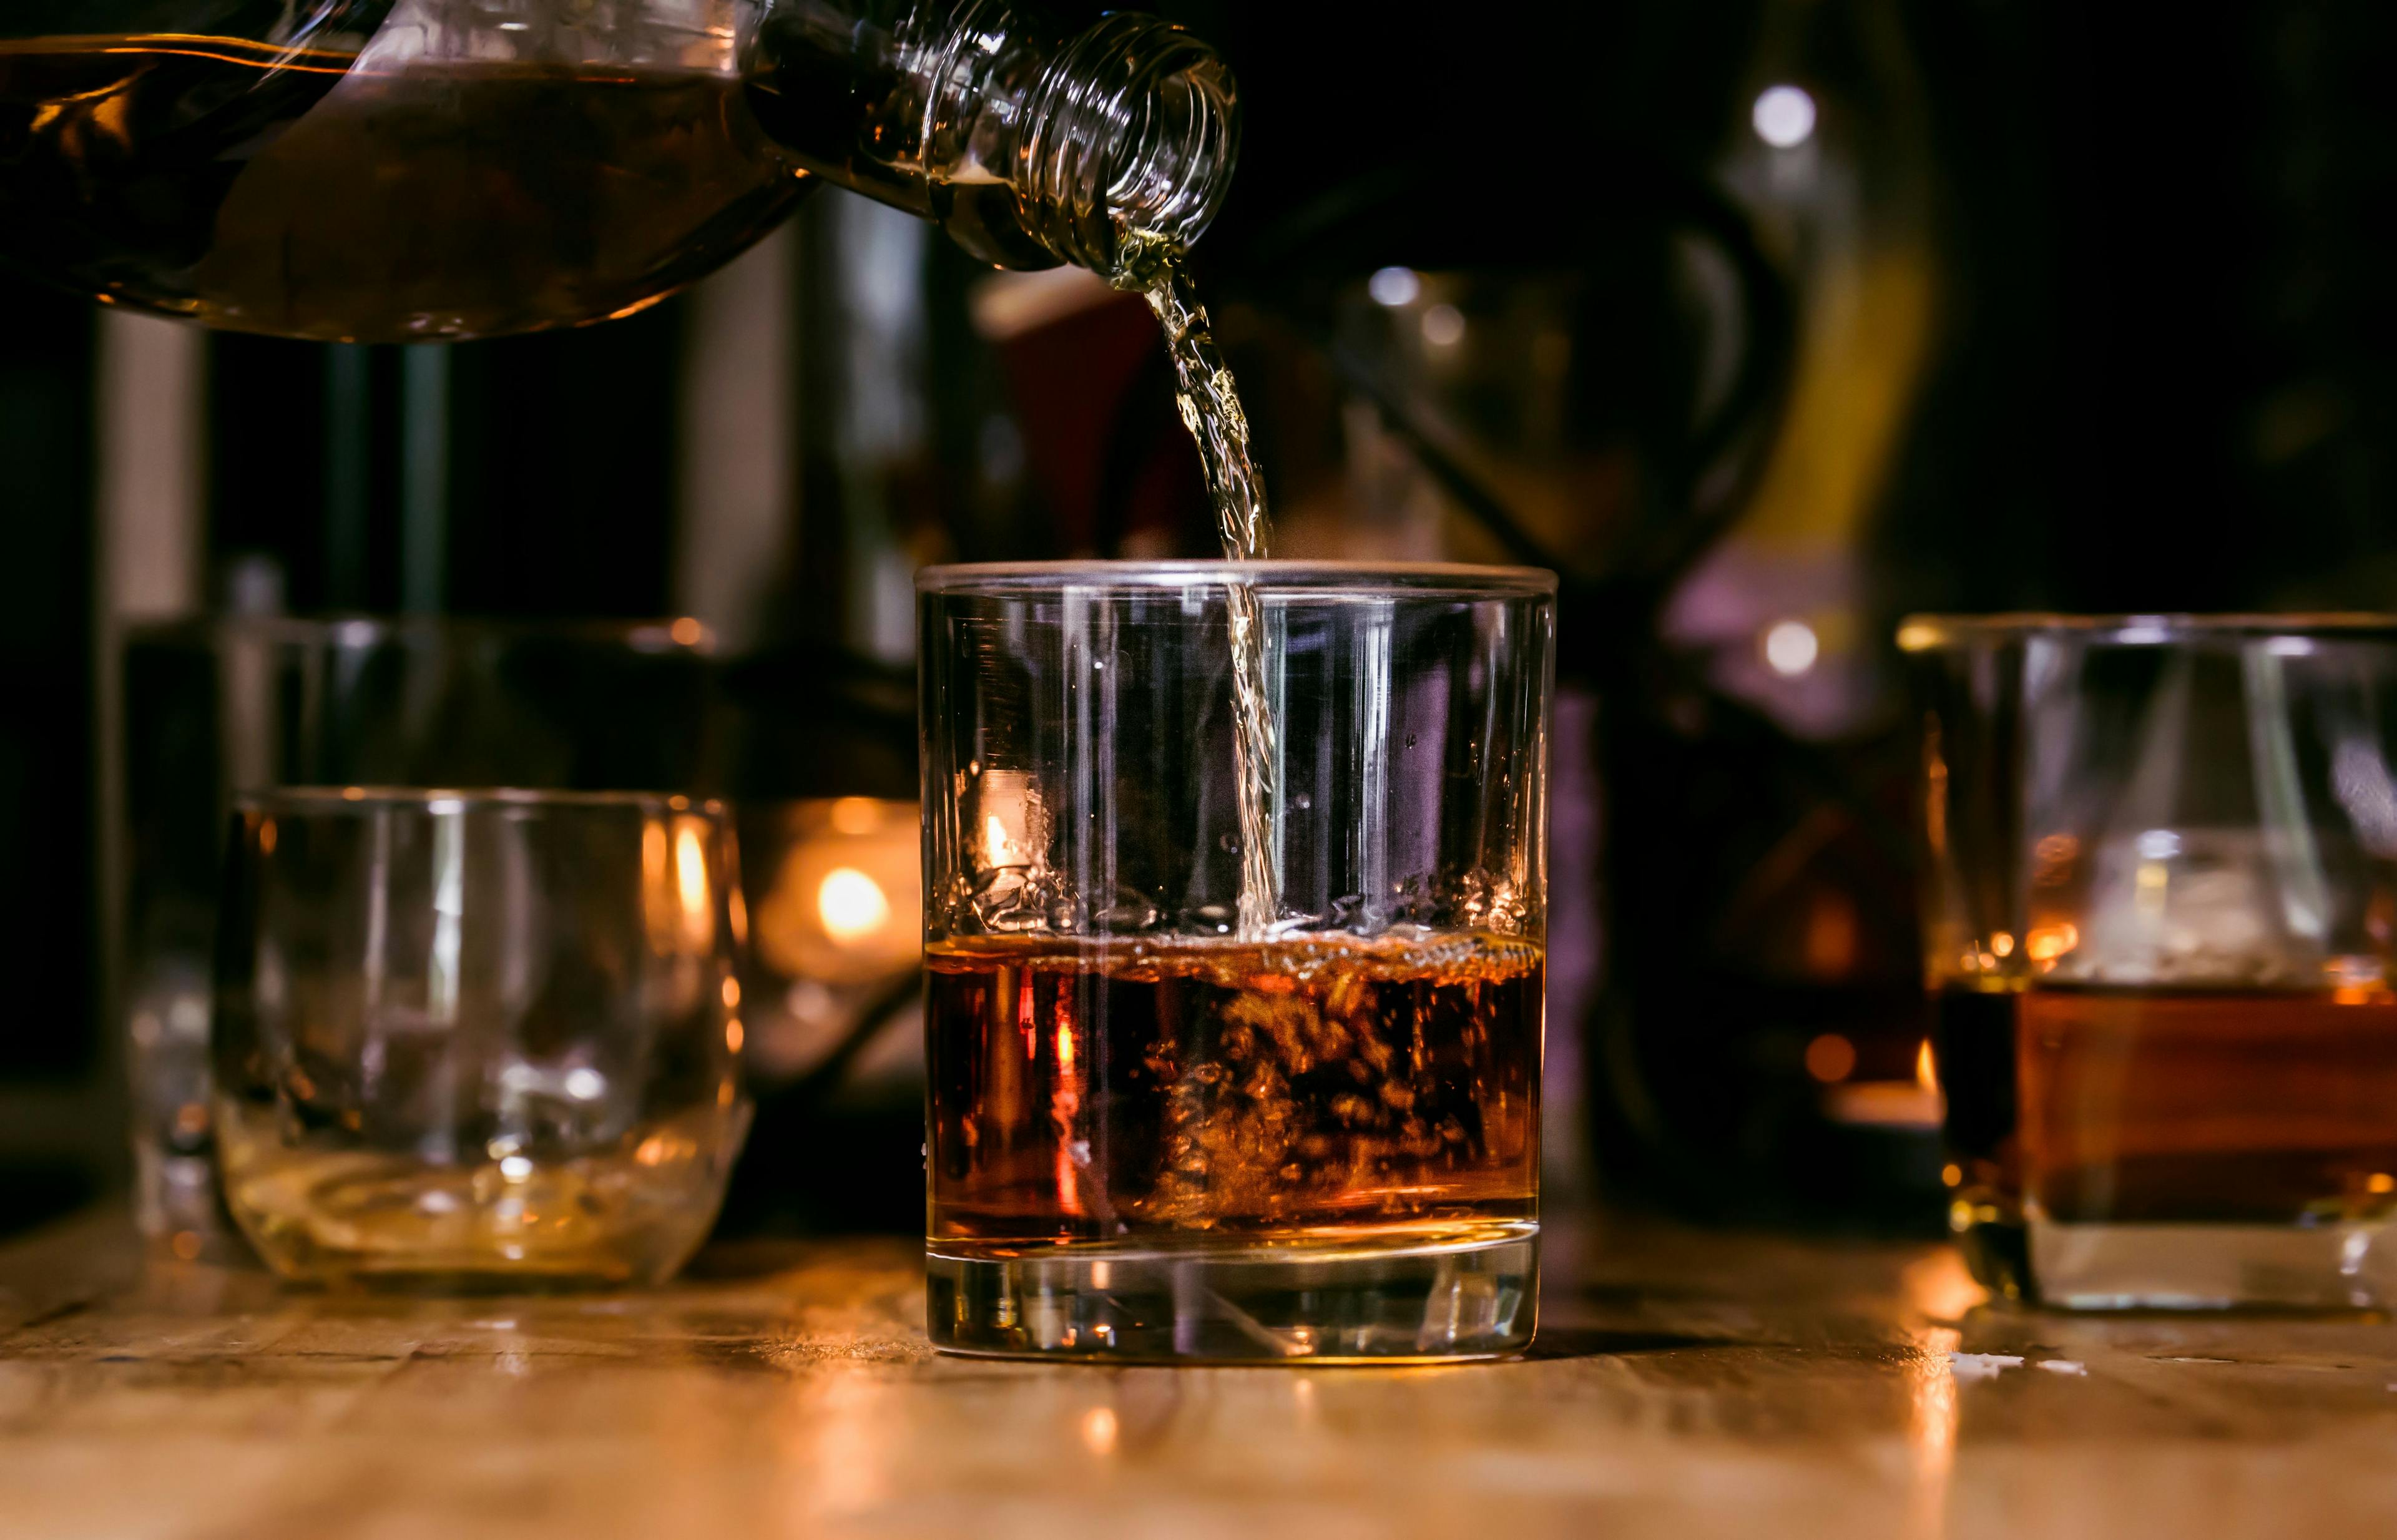 Gender disparity not found for alcohol use disorder’s link to suicide | Image Credit: © maeching - © maeching - stock.adobe.com.